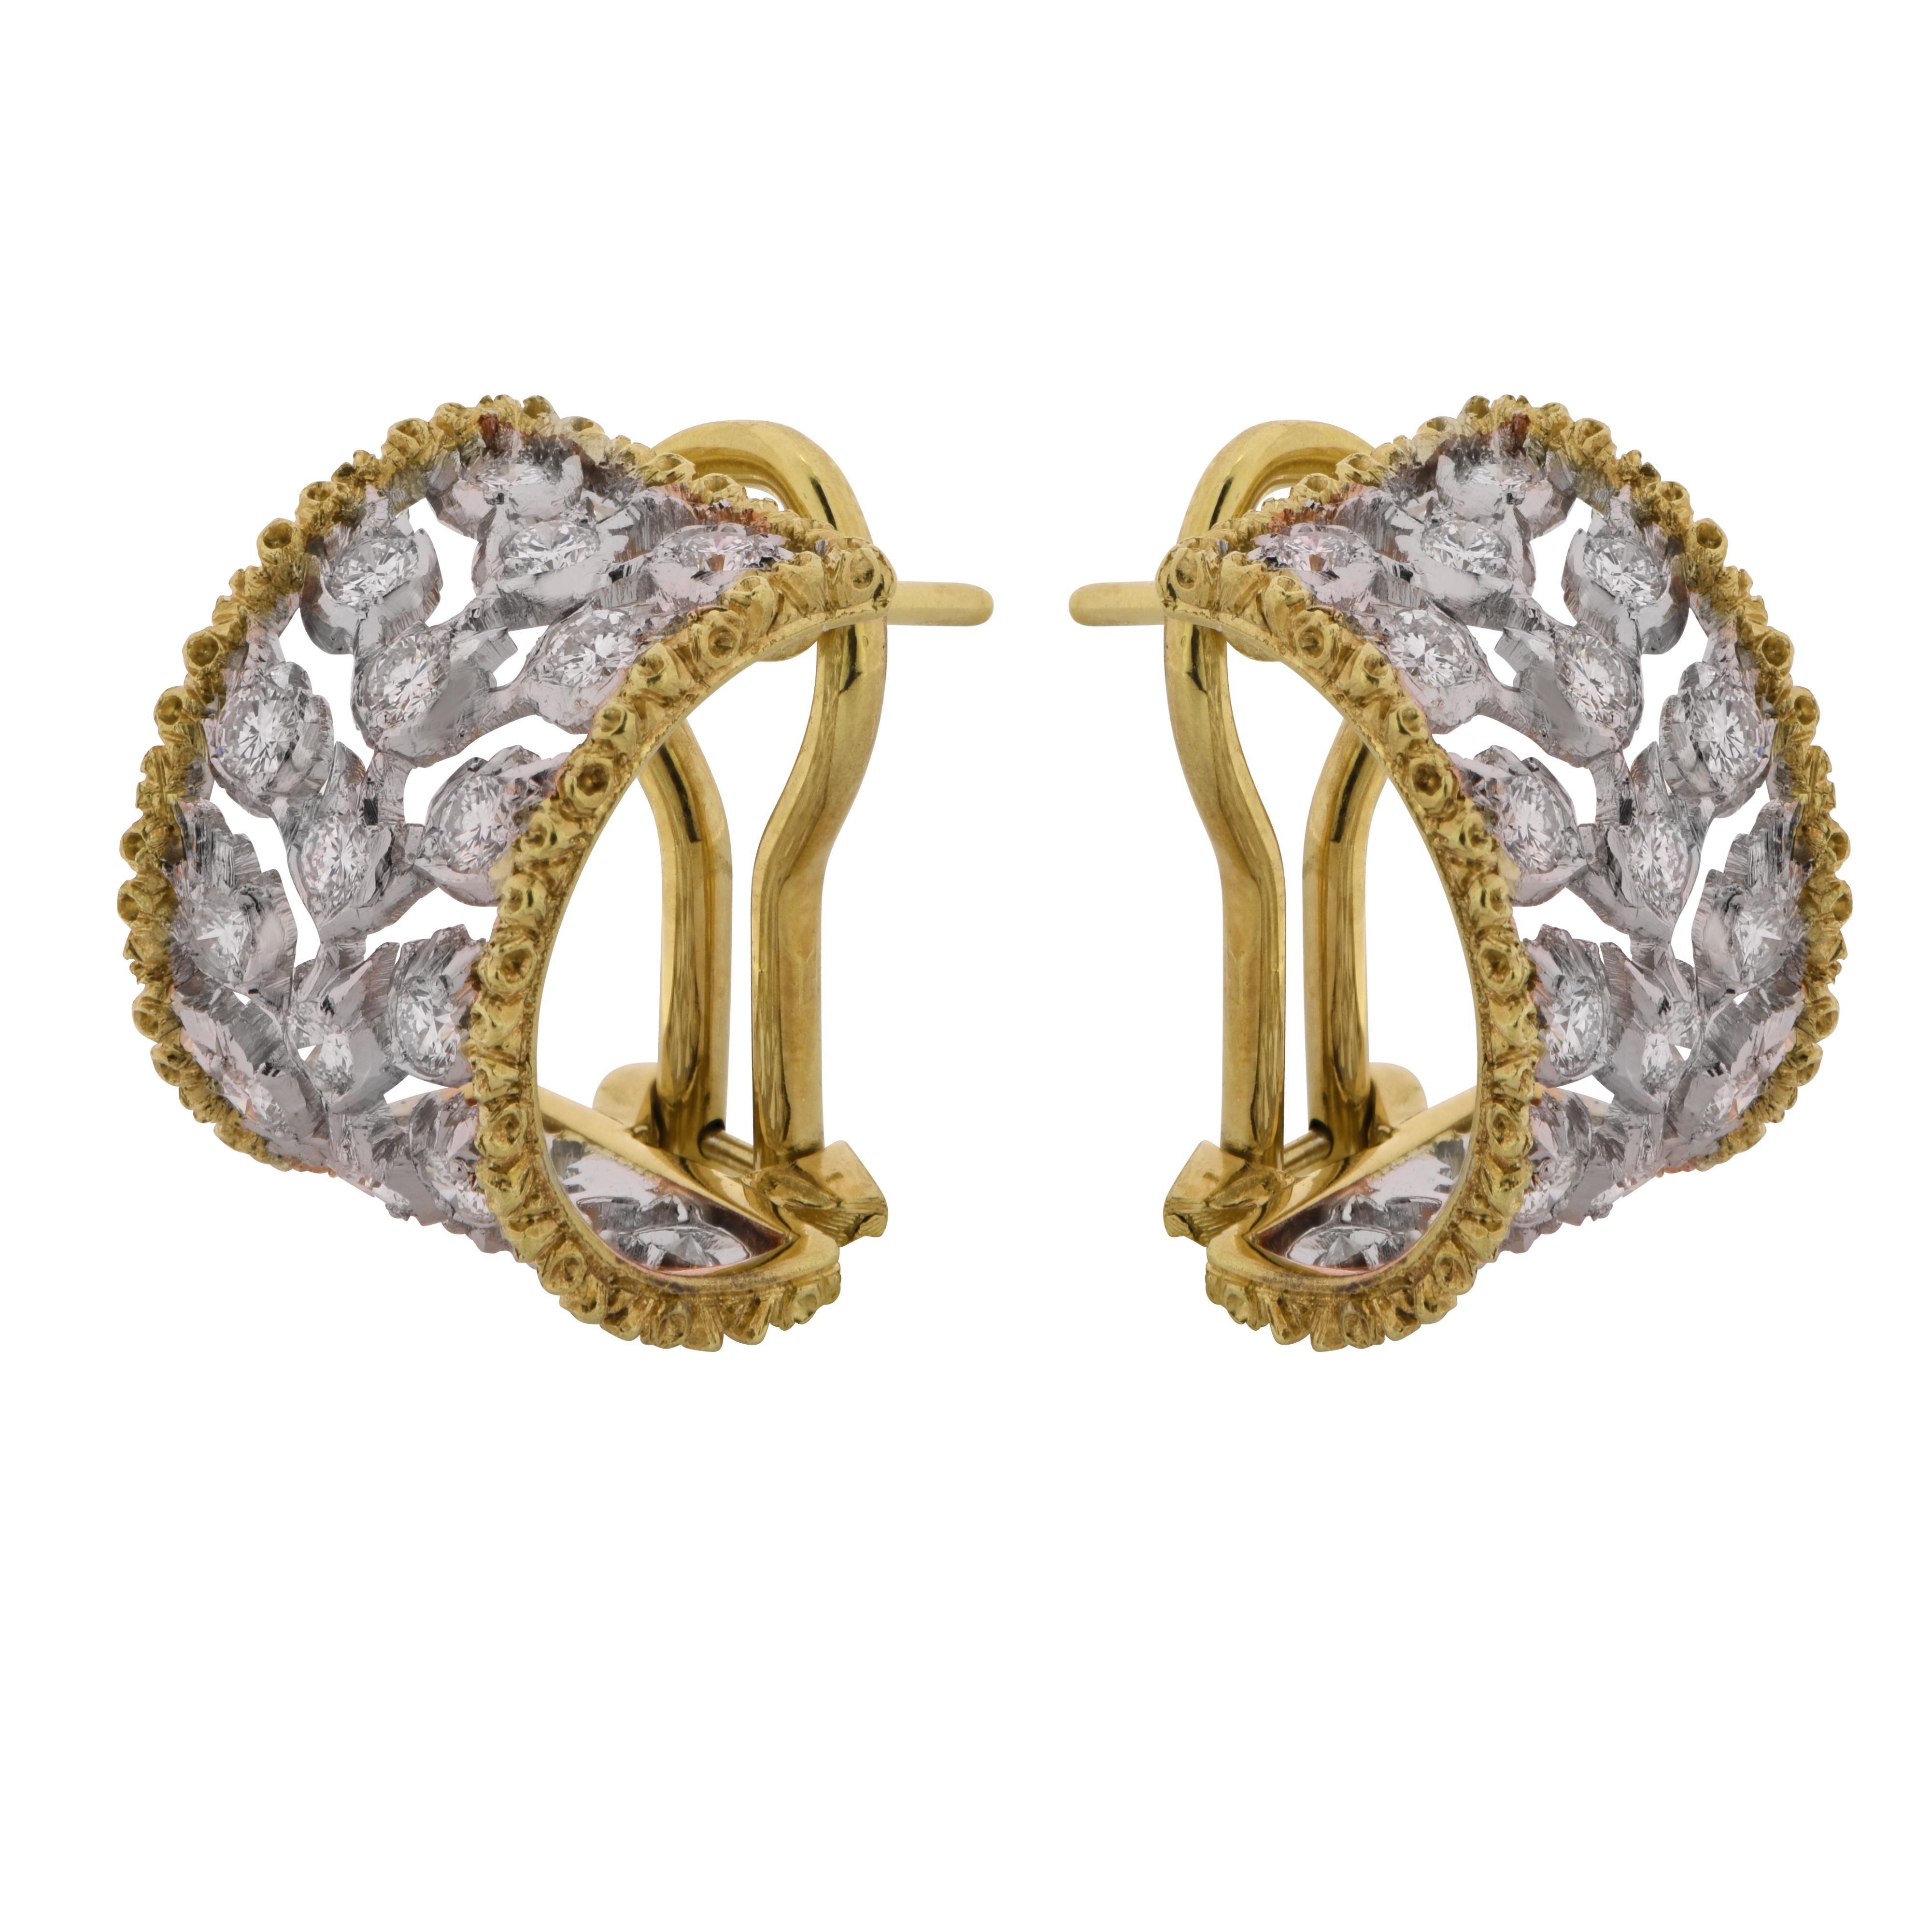 Spectacular three row diamond huggie earrings from the Ramage Collection by Buccellati, crafted in 18 Karat white and yellow gold, featuring forty round brilliant cut diamonds weighing approximately  .80 carats, E-F color, VVS clarity. These